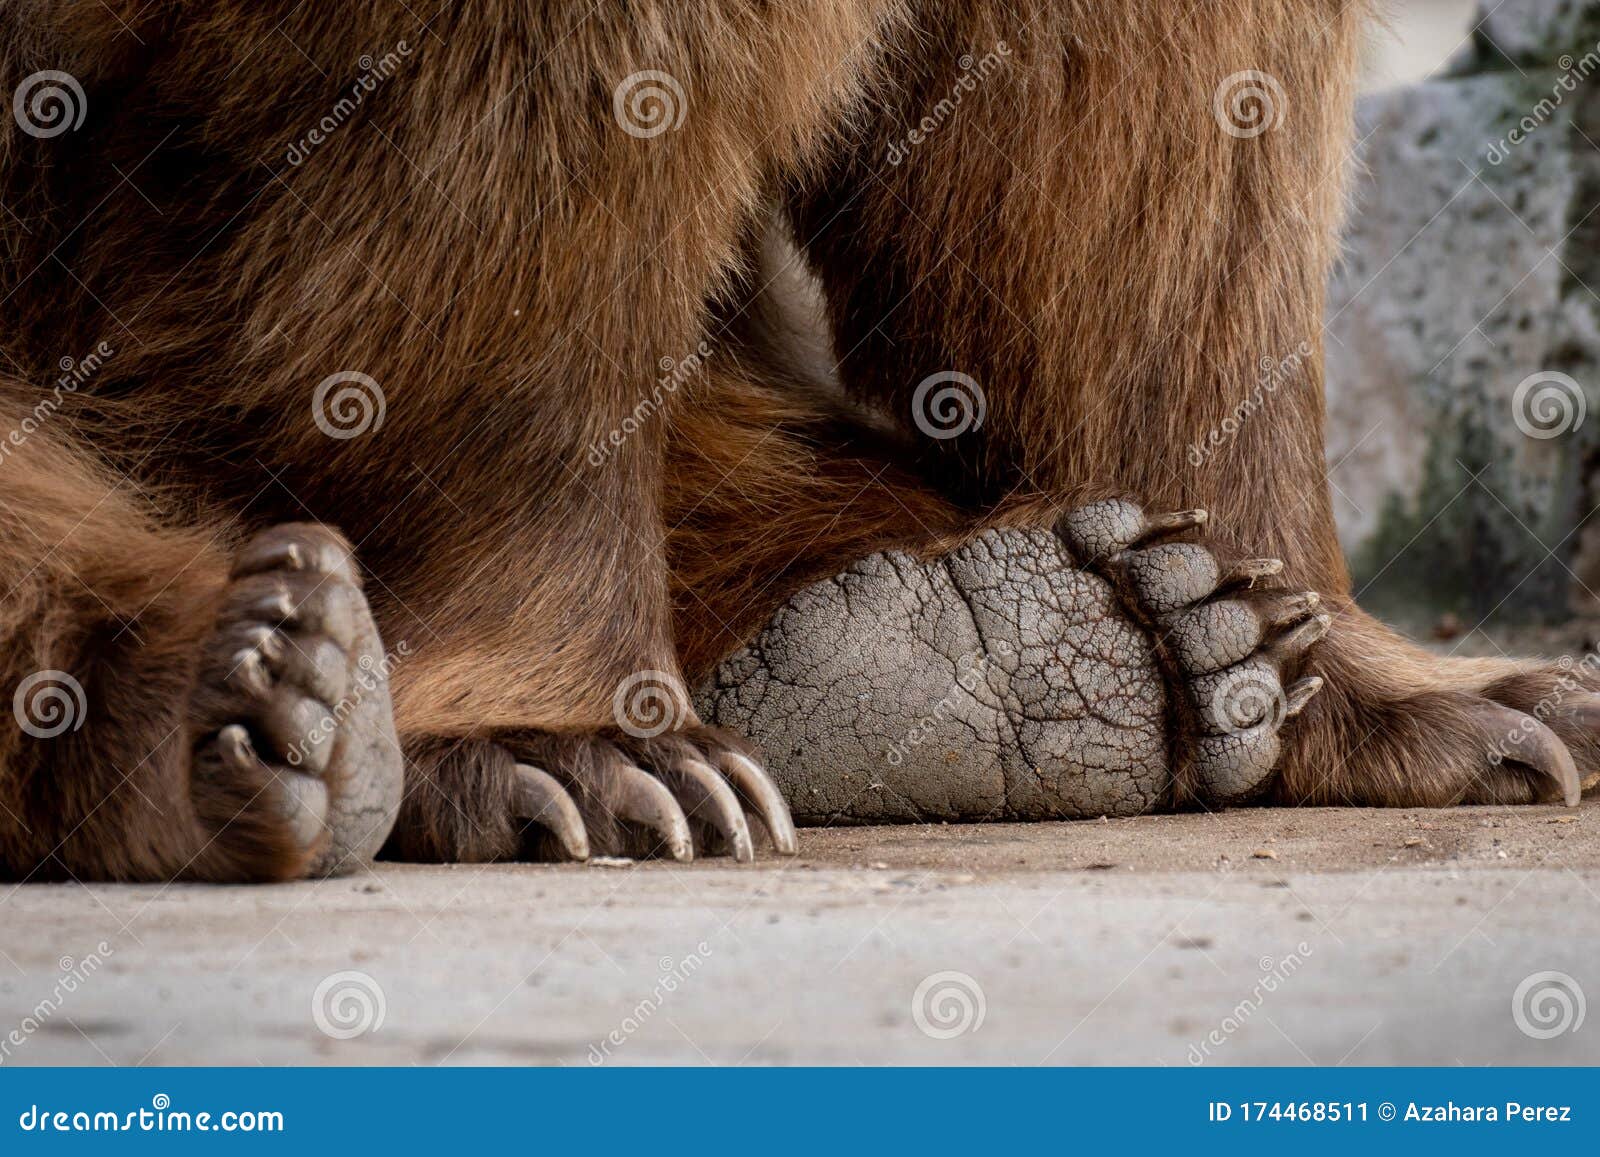 Detail of the Claws Pads of a Brown Bear Stock Image - Image majestic, nature: 174468511